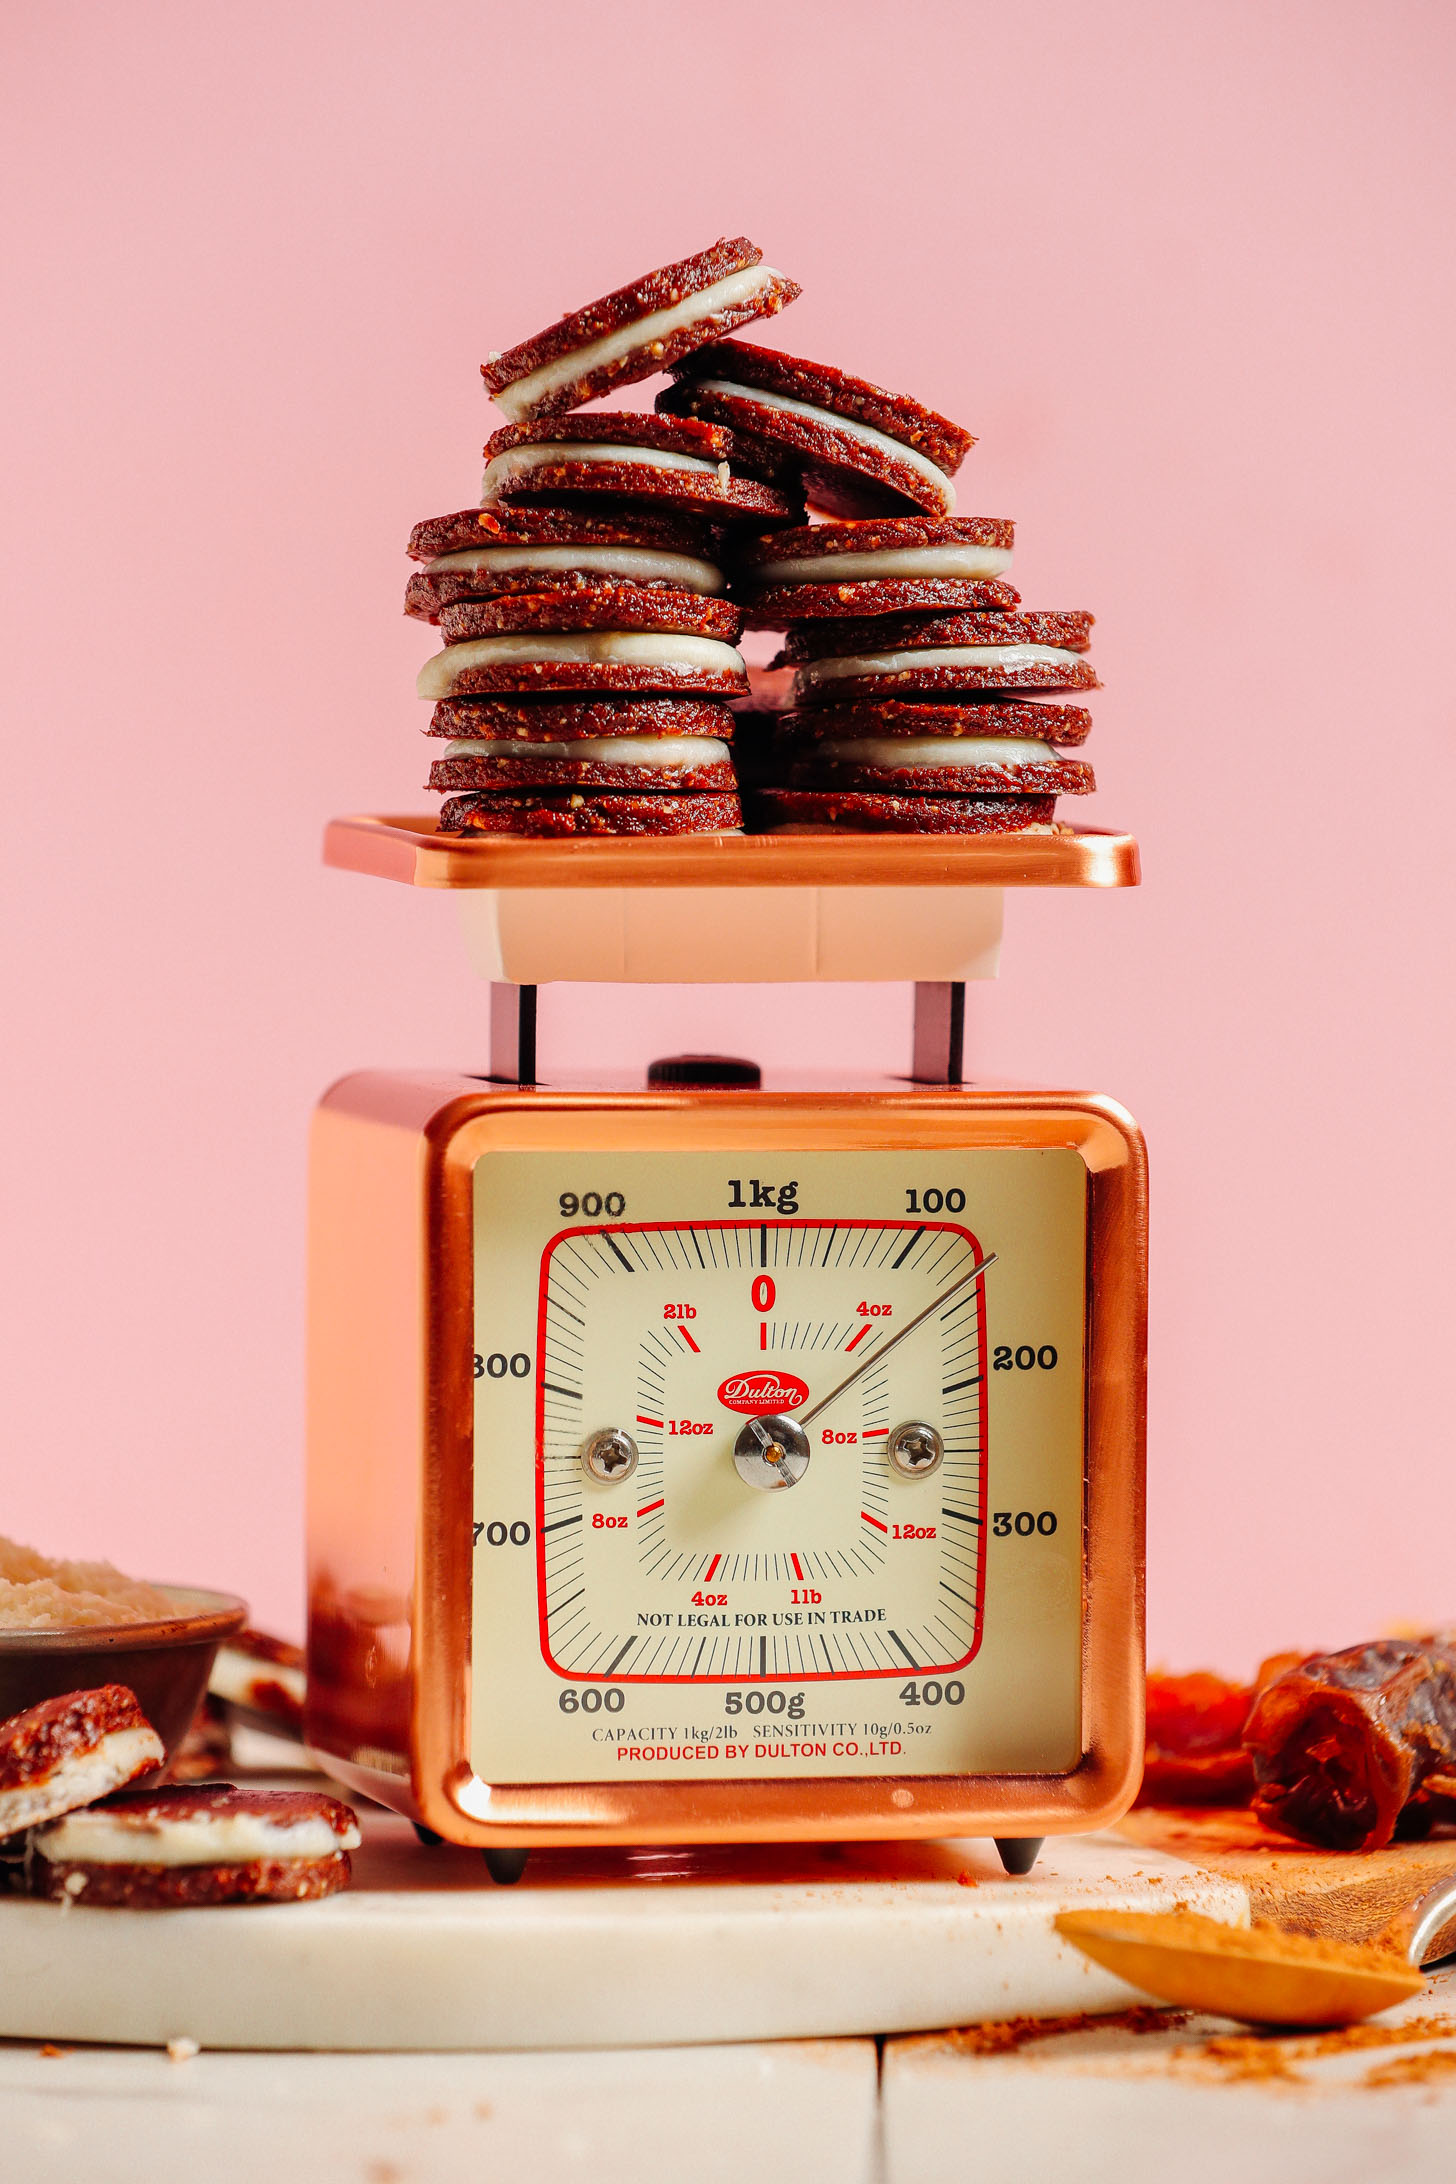 A vintage gold scale holding several gluten-free Raw Oreo Cookies